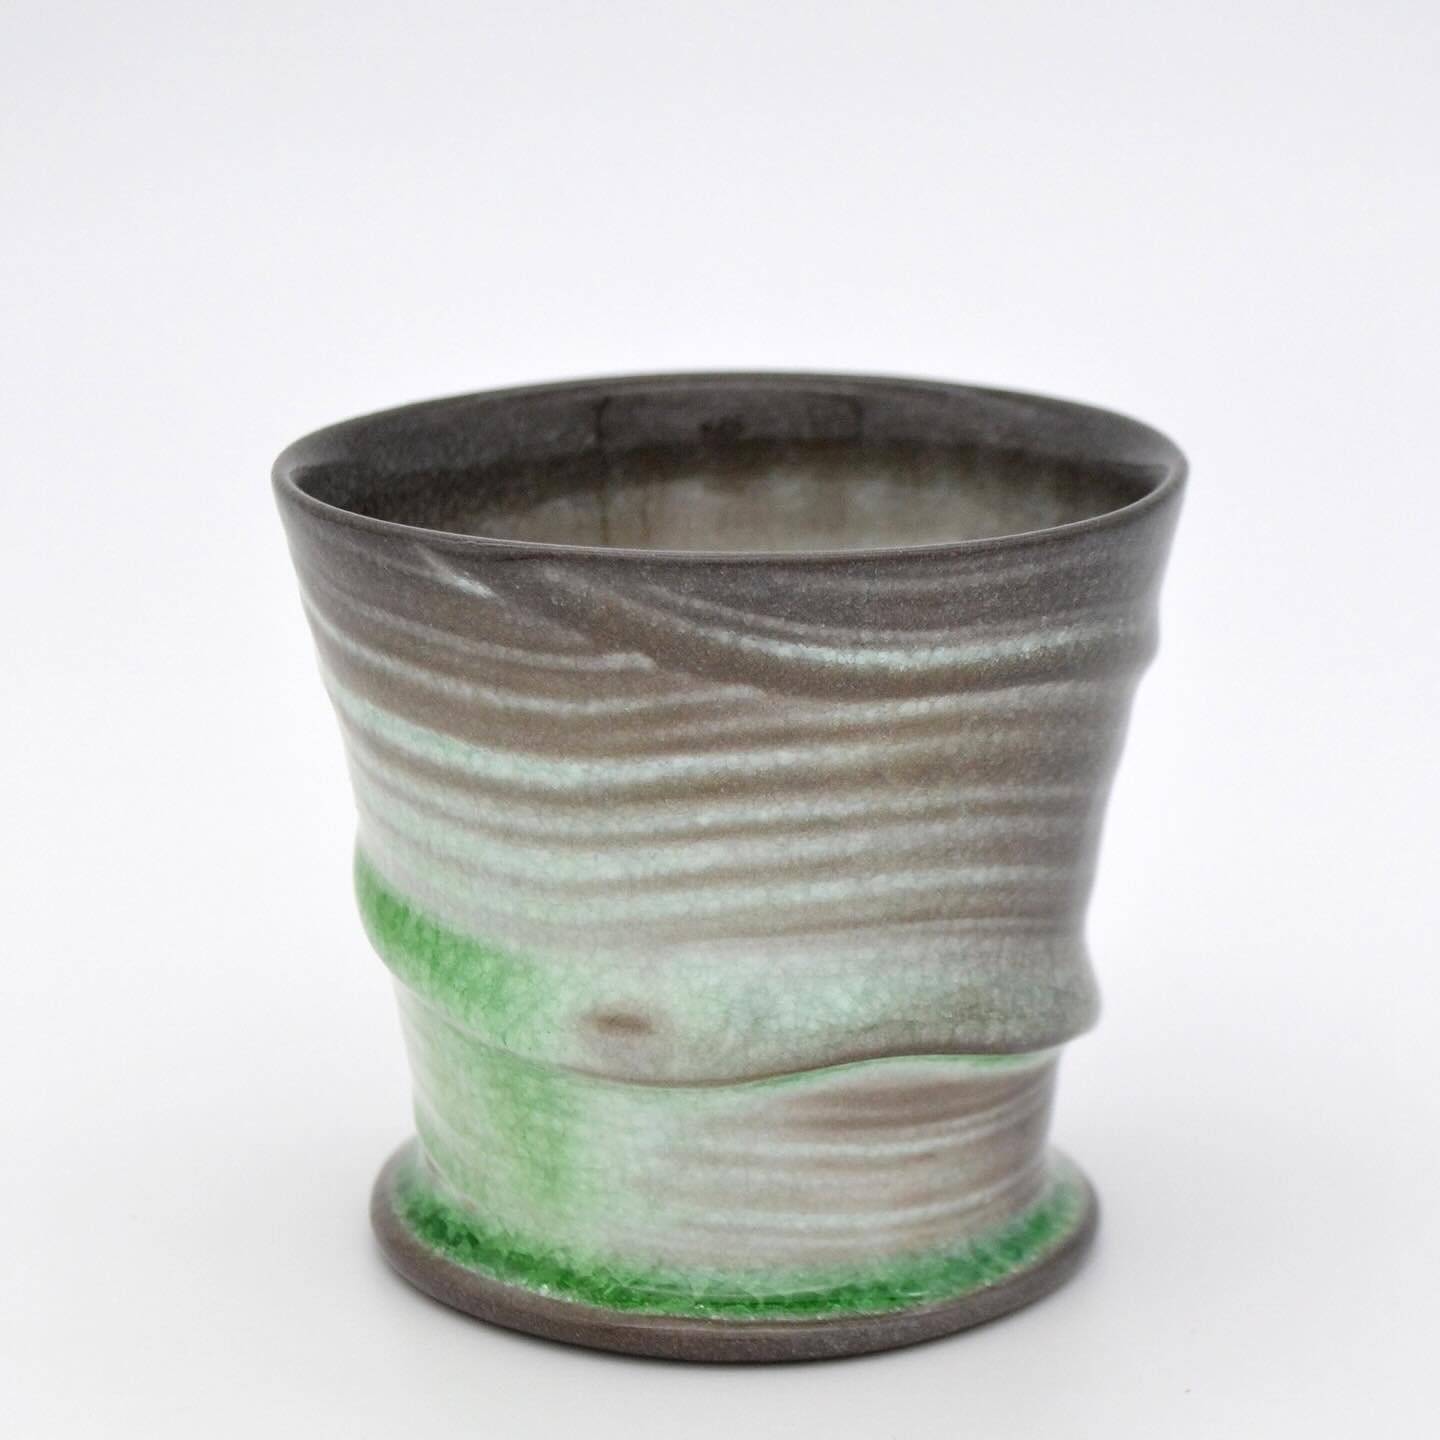 There are still a few spots open in our summer soda firing workshop with Matt Long! Join us at SCAC from June 1-5 to learn all about creating line and gesture on the surface of your pots. Registration closes on May 27&ndash;don&rsquo;t delay! Head ov